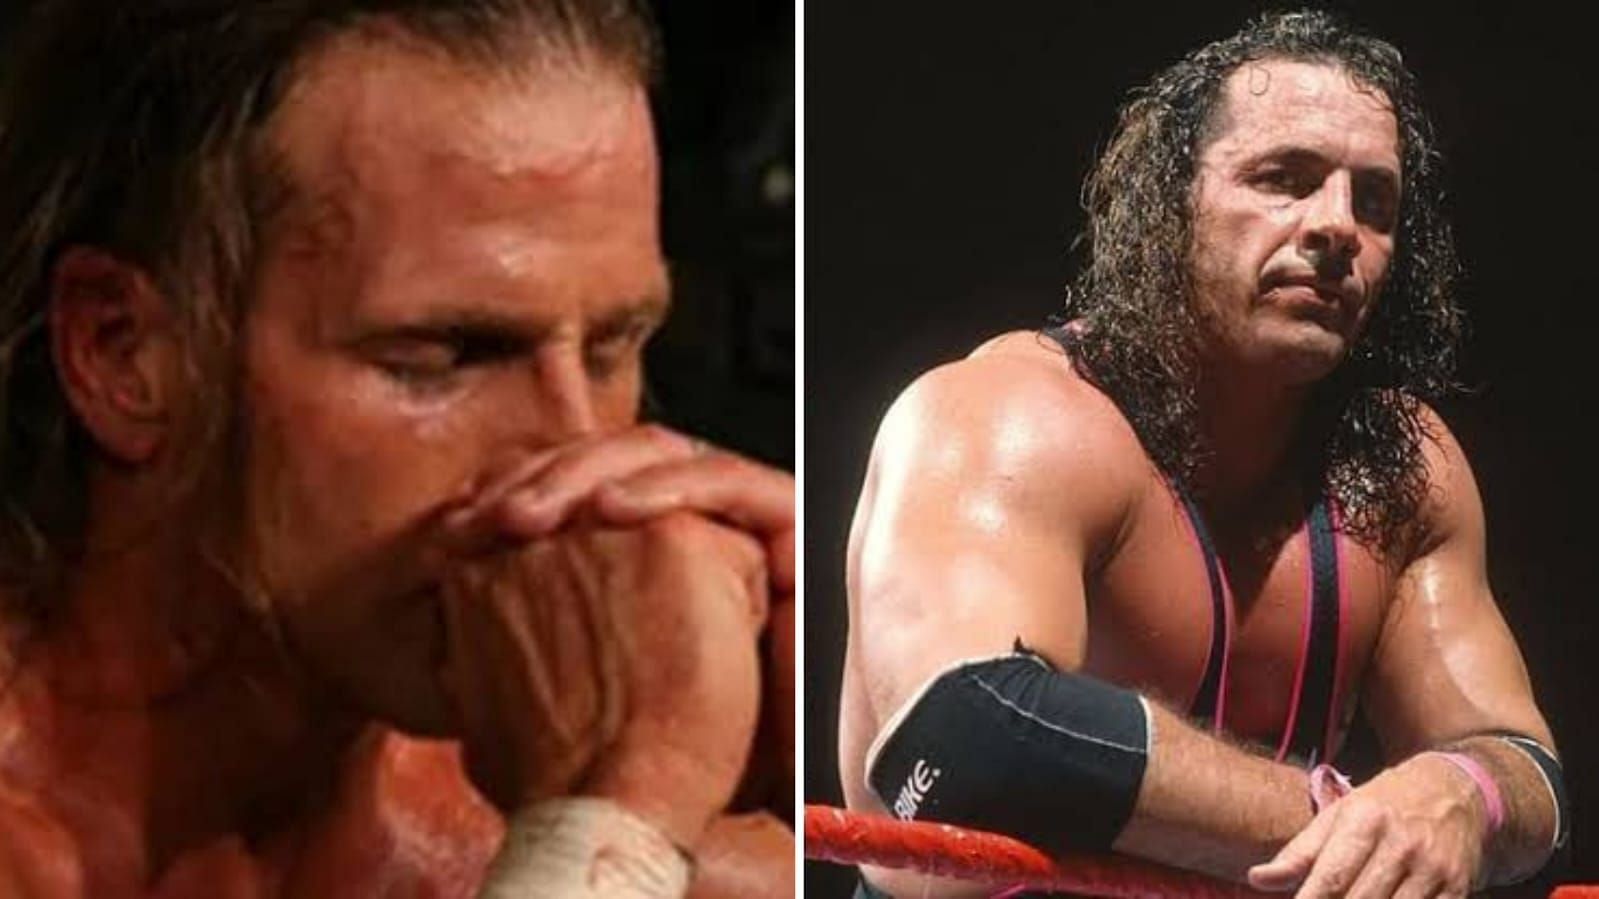 Bret Hart and Shawn Michaels are two of WWE